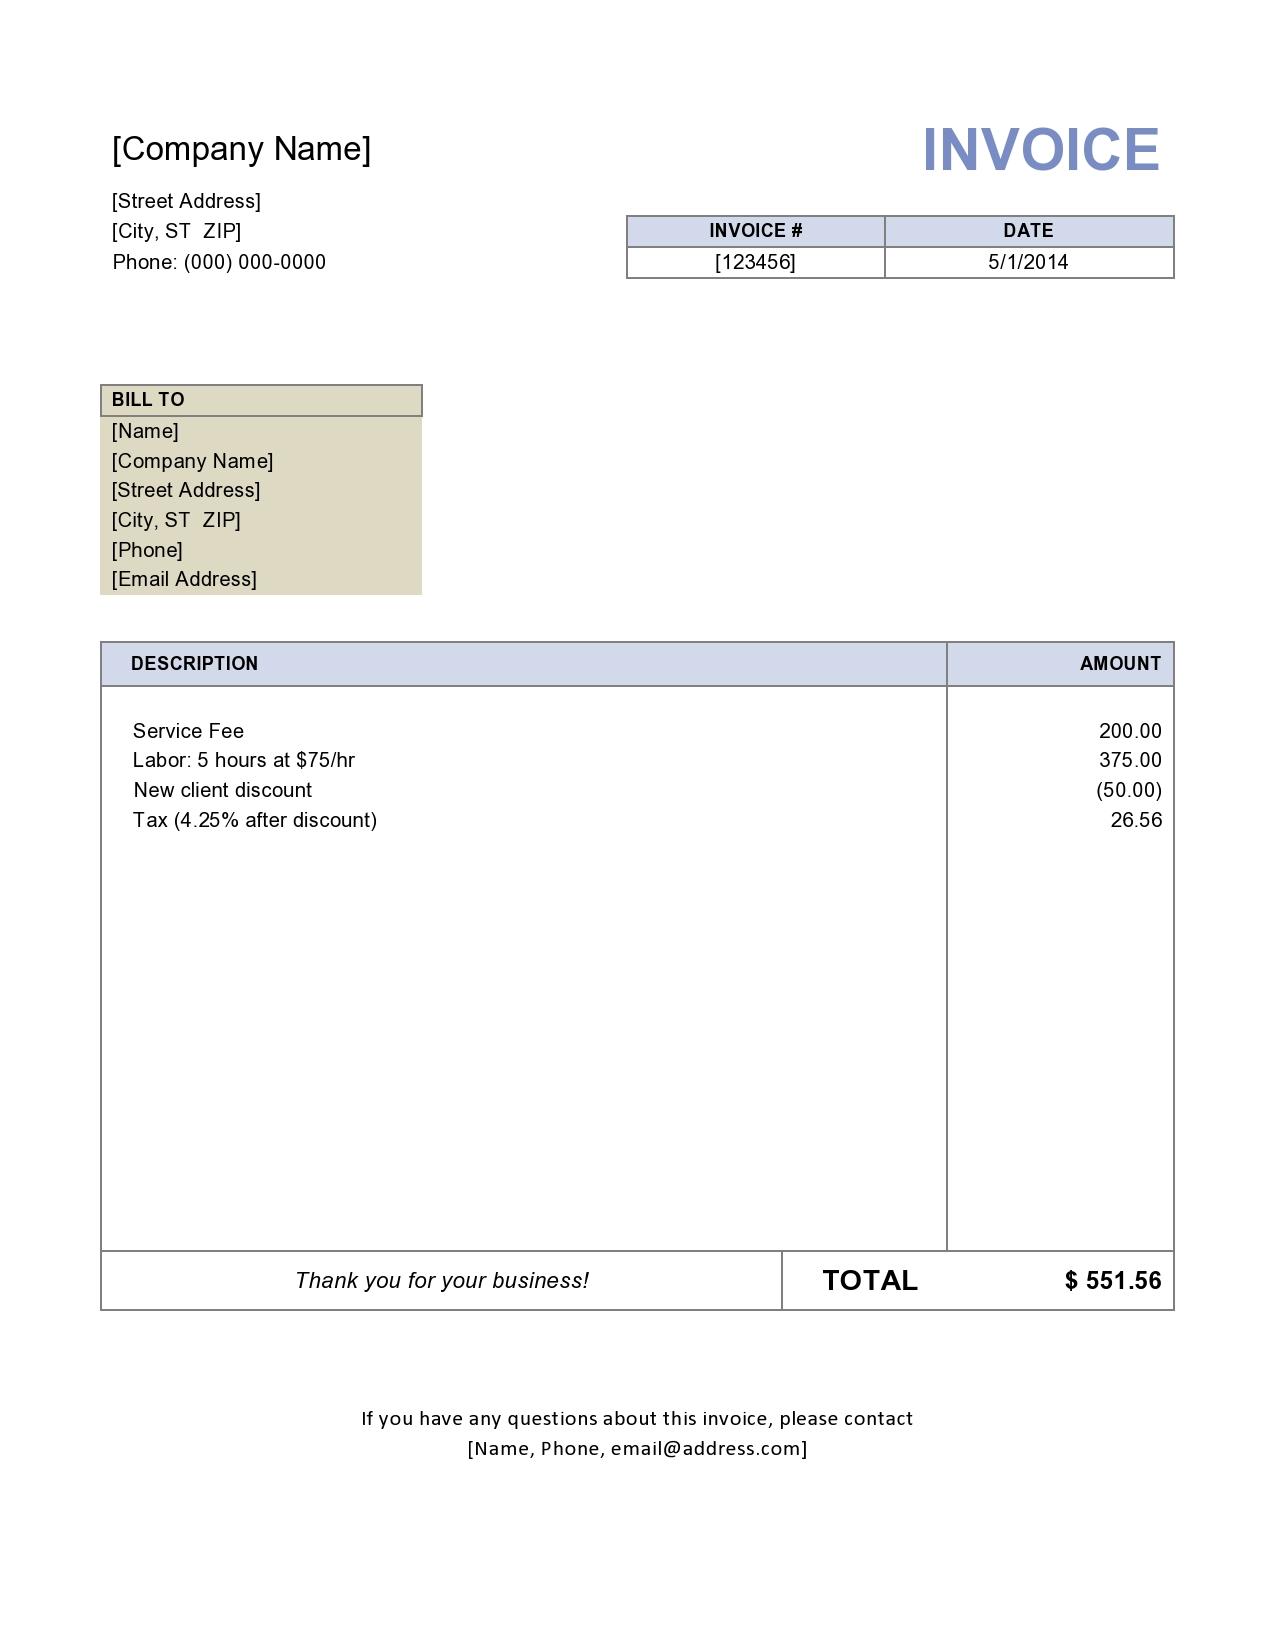 Invoice Template Free  Small Business Invoice Template Intended For Invoice Template Word 2010